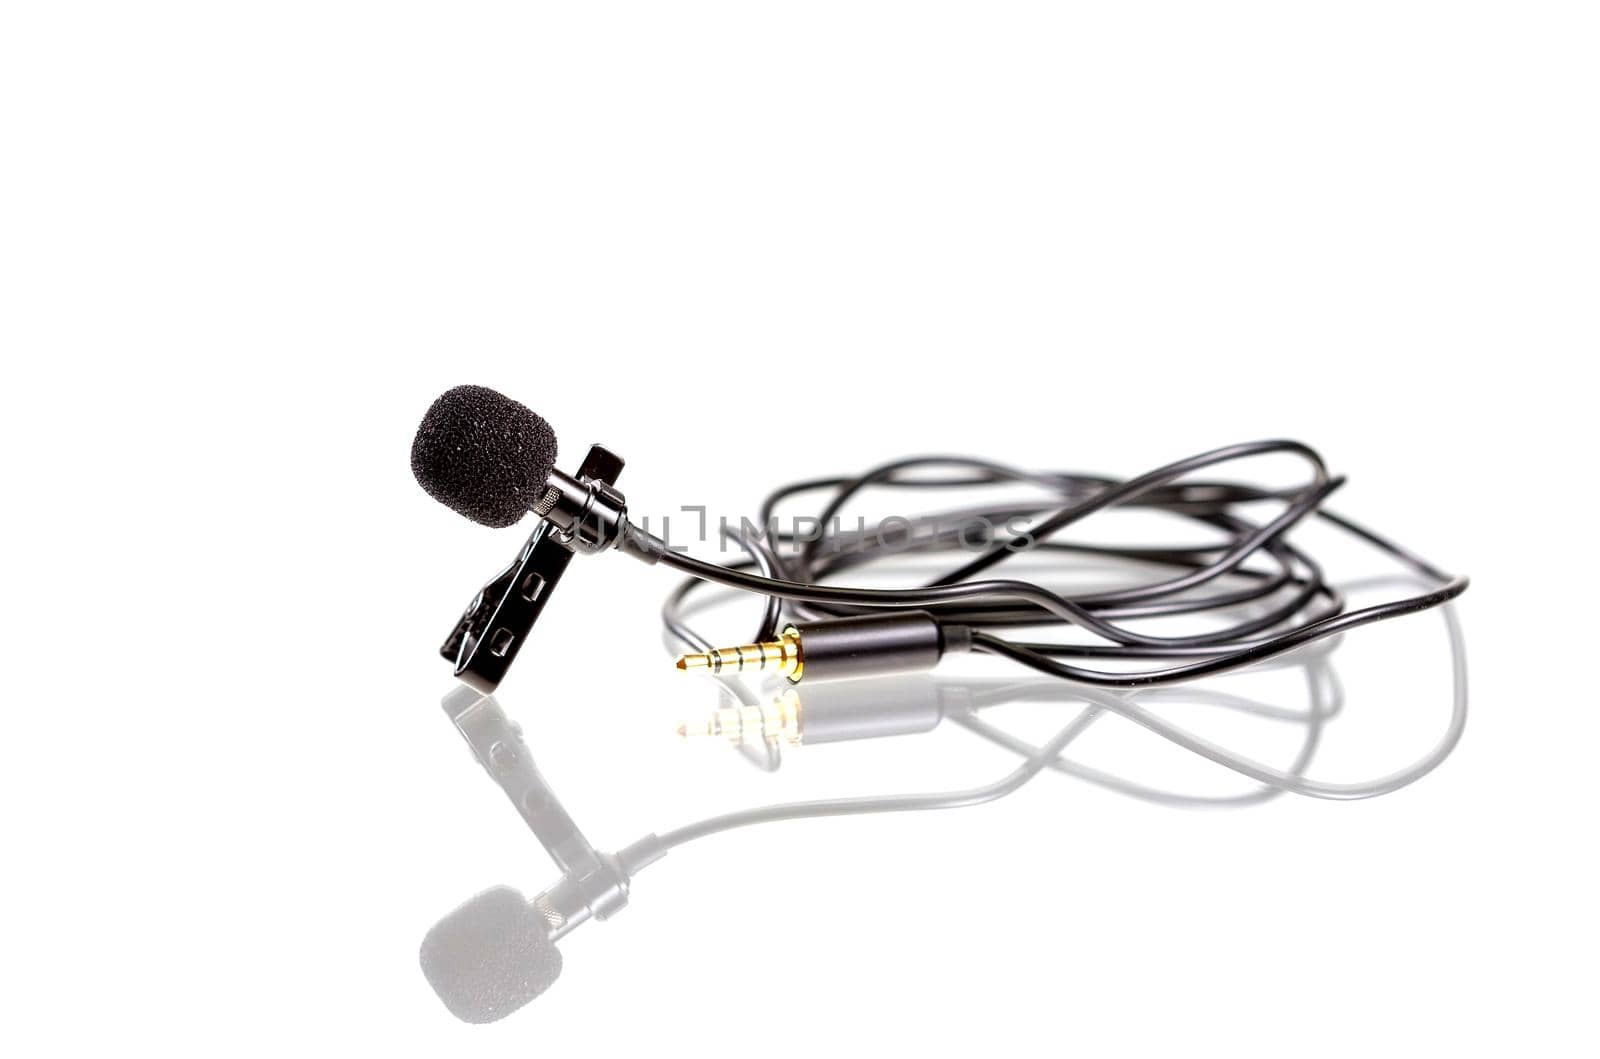 Small lavalier microphone or lapel mic with clip on white background. by galinasharapova